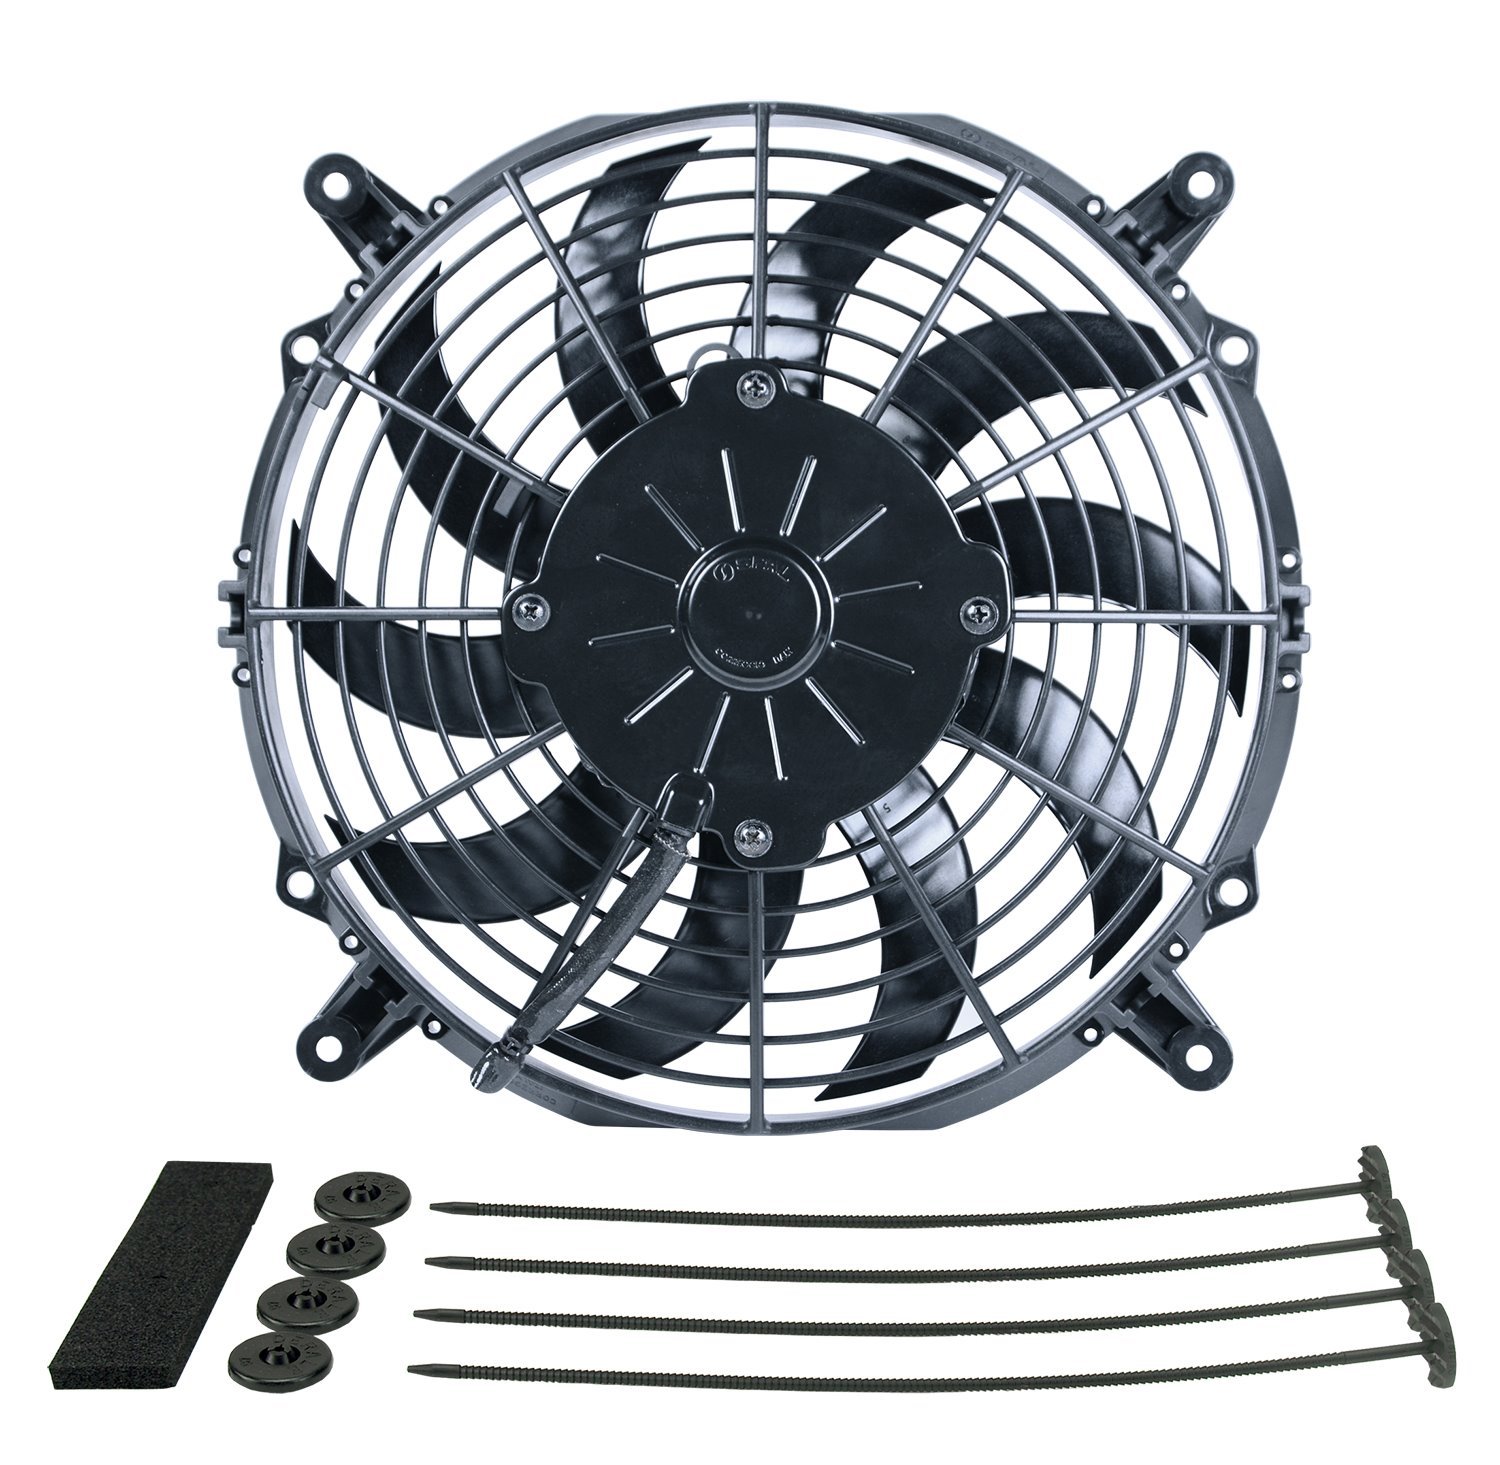 10" High-Output Extreme Ultra-Low Profile Waterproof/Dustproof Puller-Style Electric Fan 802 CFM